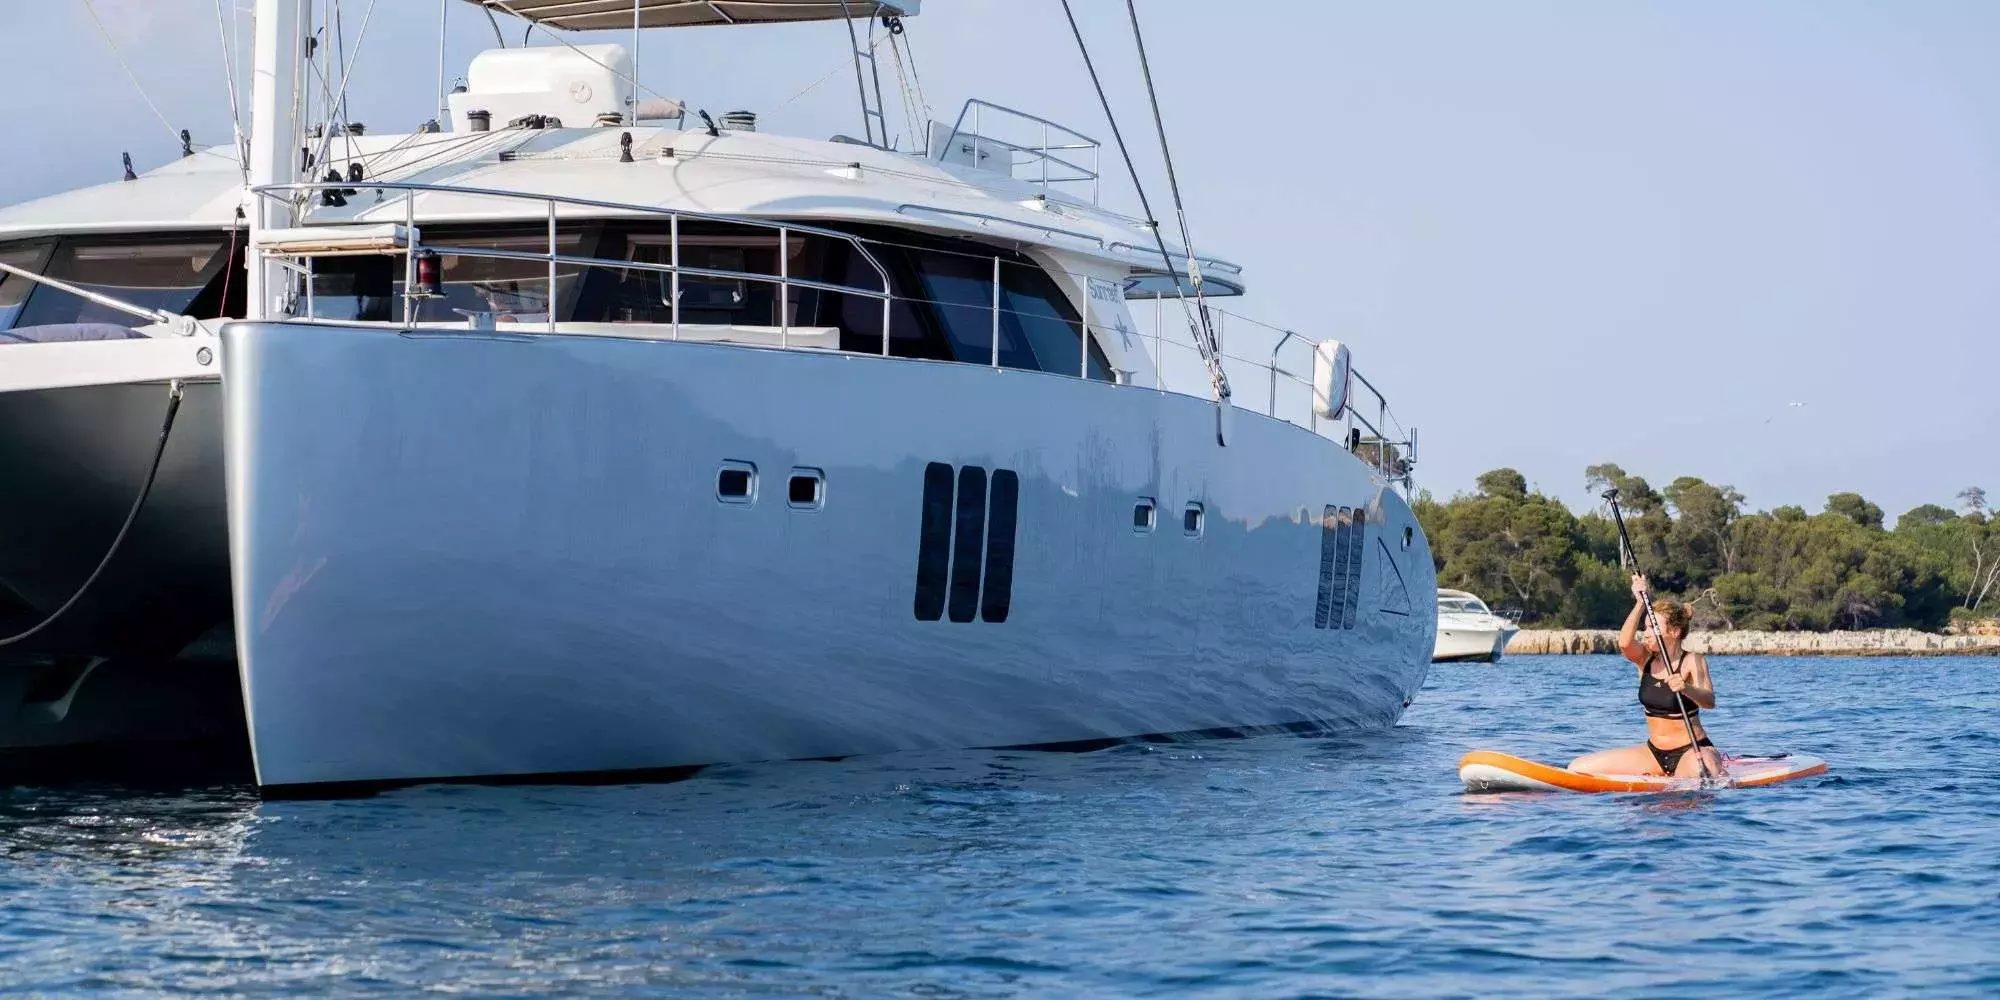 Seazen II by Sunreef Yachts - Top rates for a Rental of a private Luxury Catamaran in Italy